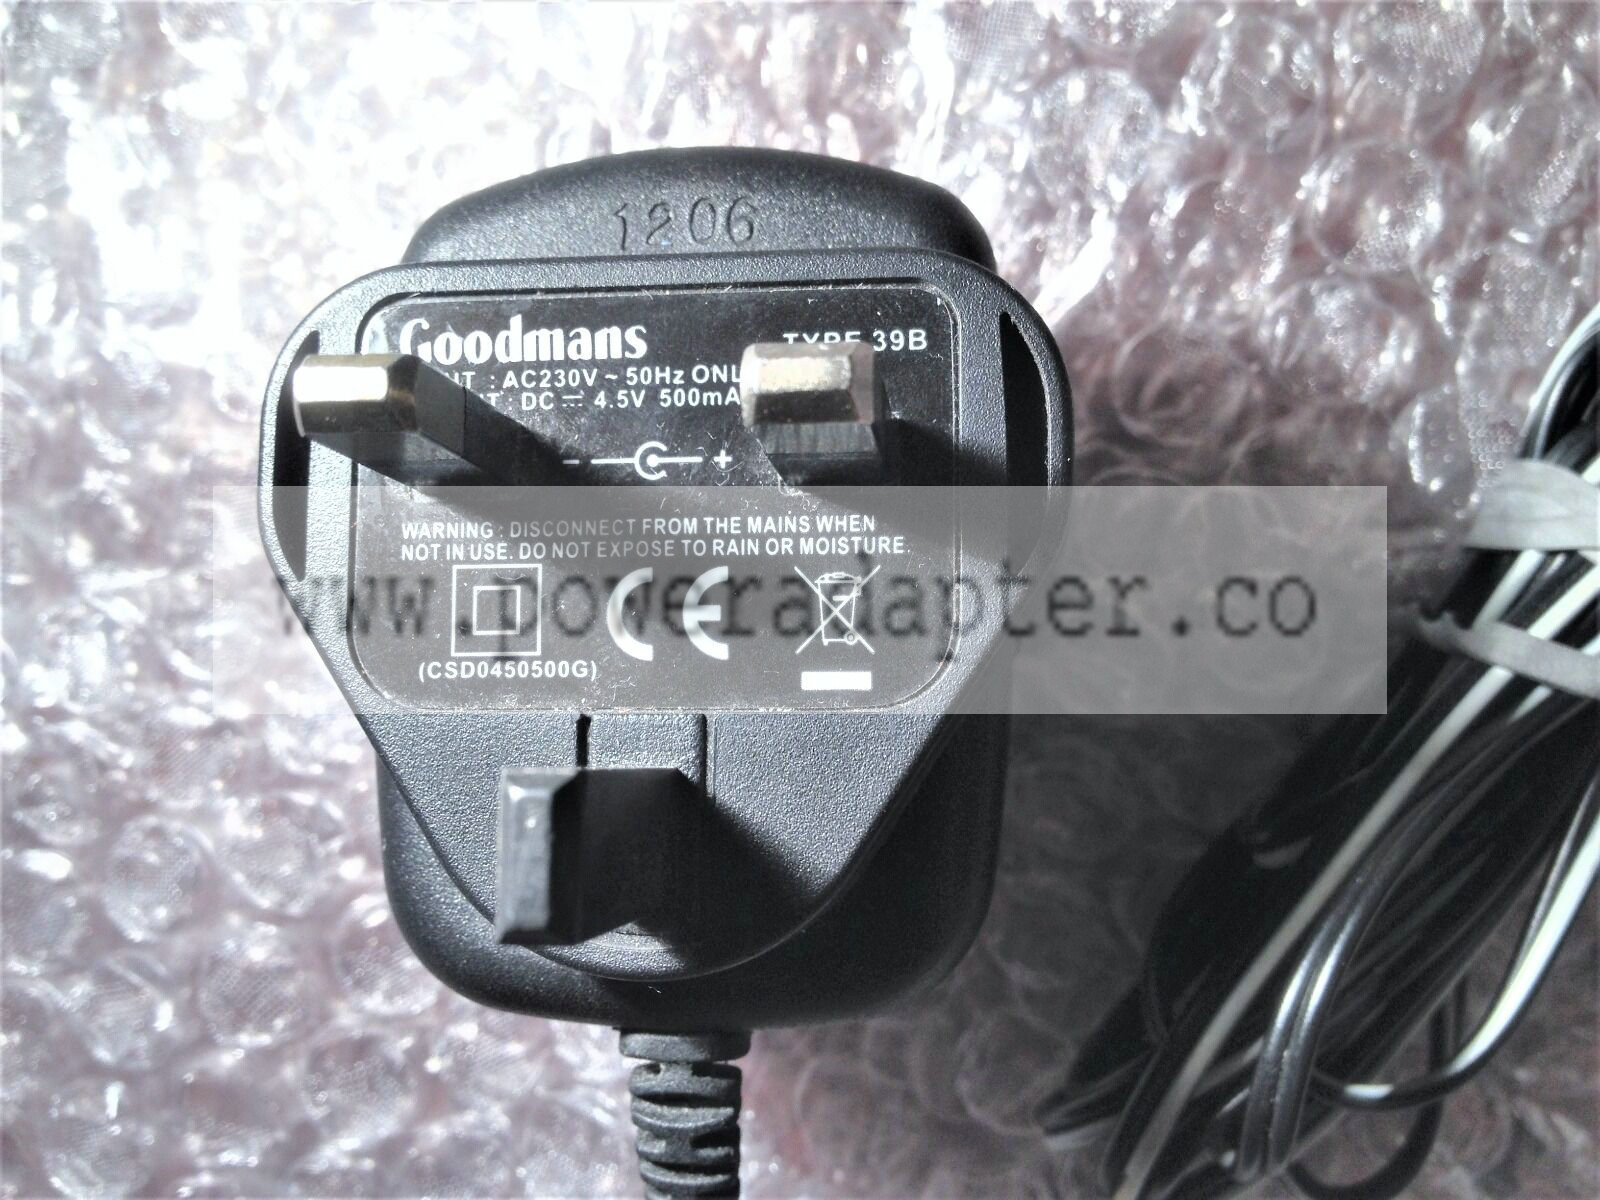 Goodmans Type 39b Charger / Power Adapter – 4.5v 500mA output – mains 3 pin UK Goodmans Type 39b Charger / Power Adap